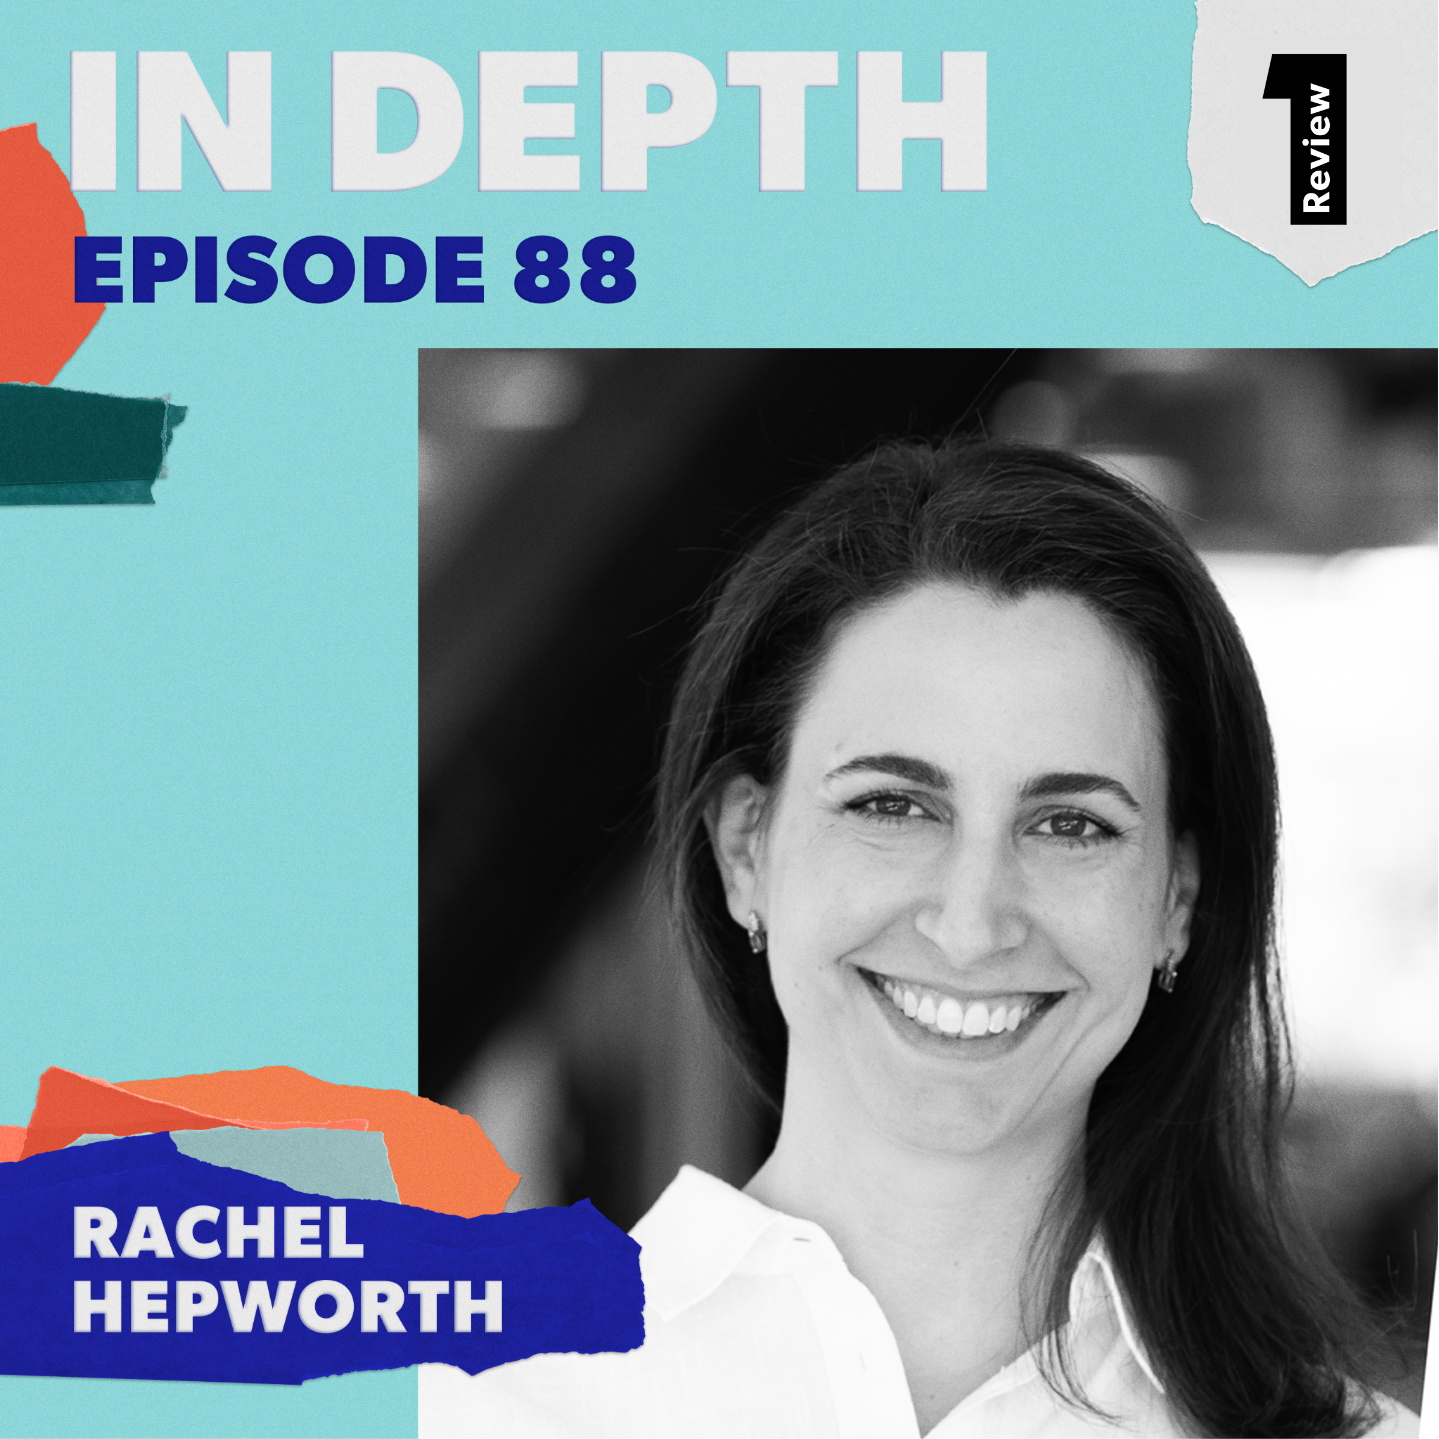 Notion’s Head of Marketing on building a growth marketing engine at a PLG company — Rachel Hepworth